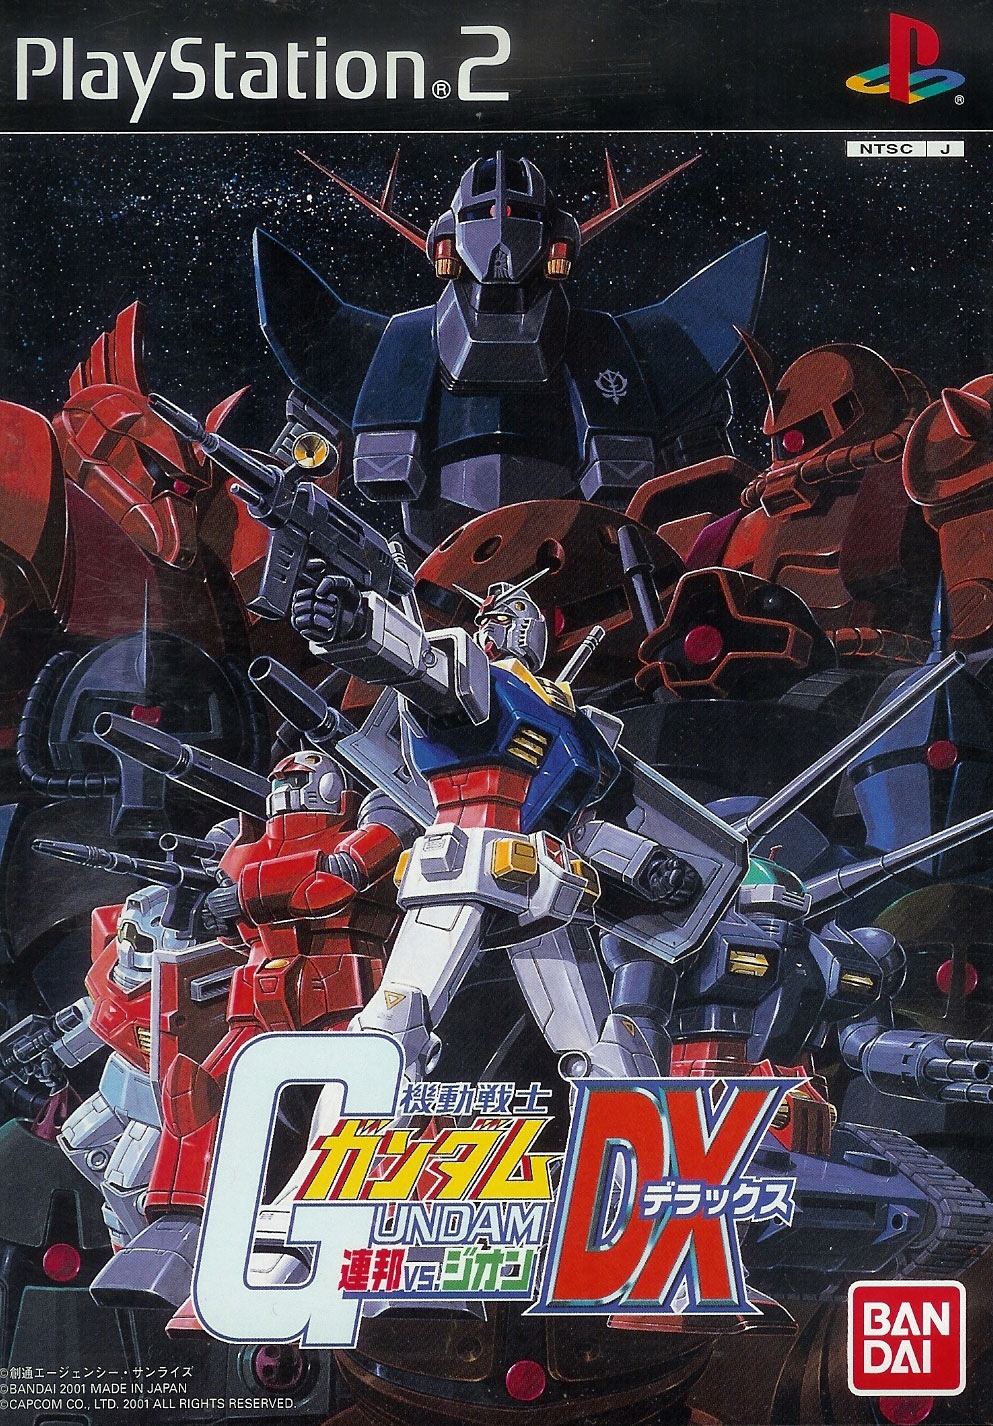 Mobile Suit Gundam: Federation vs. Zeon DX for PlayStation 2 